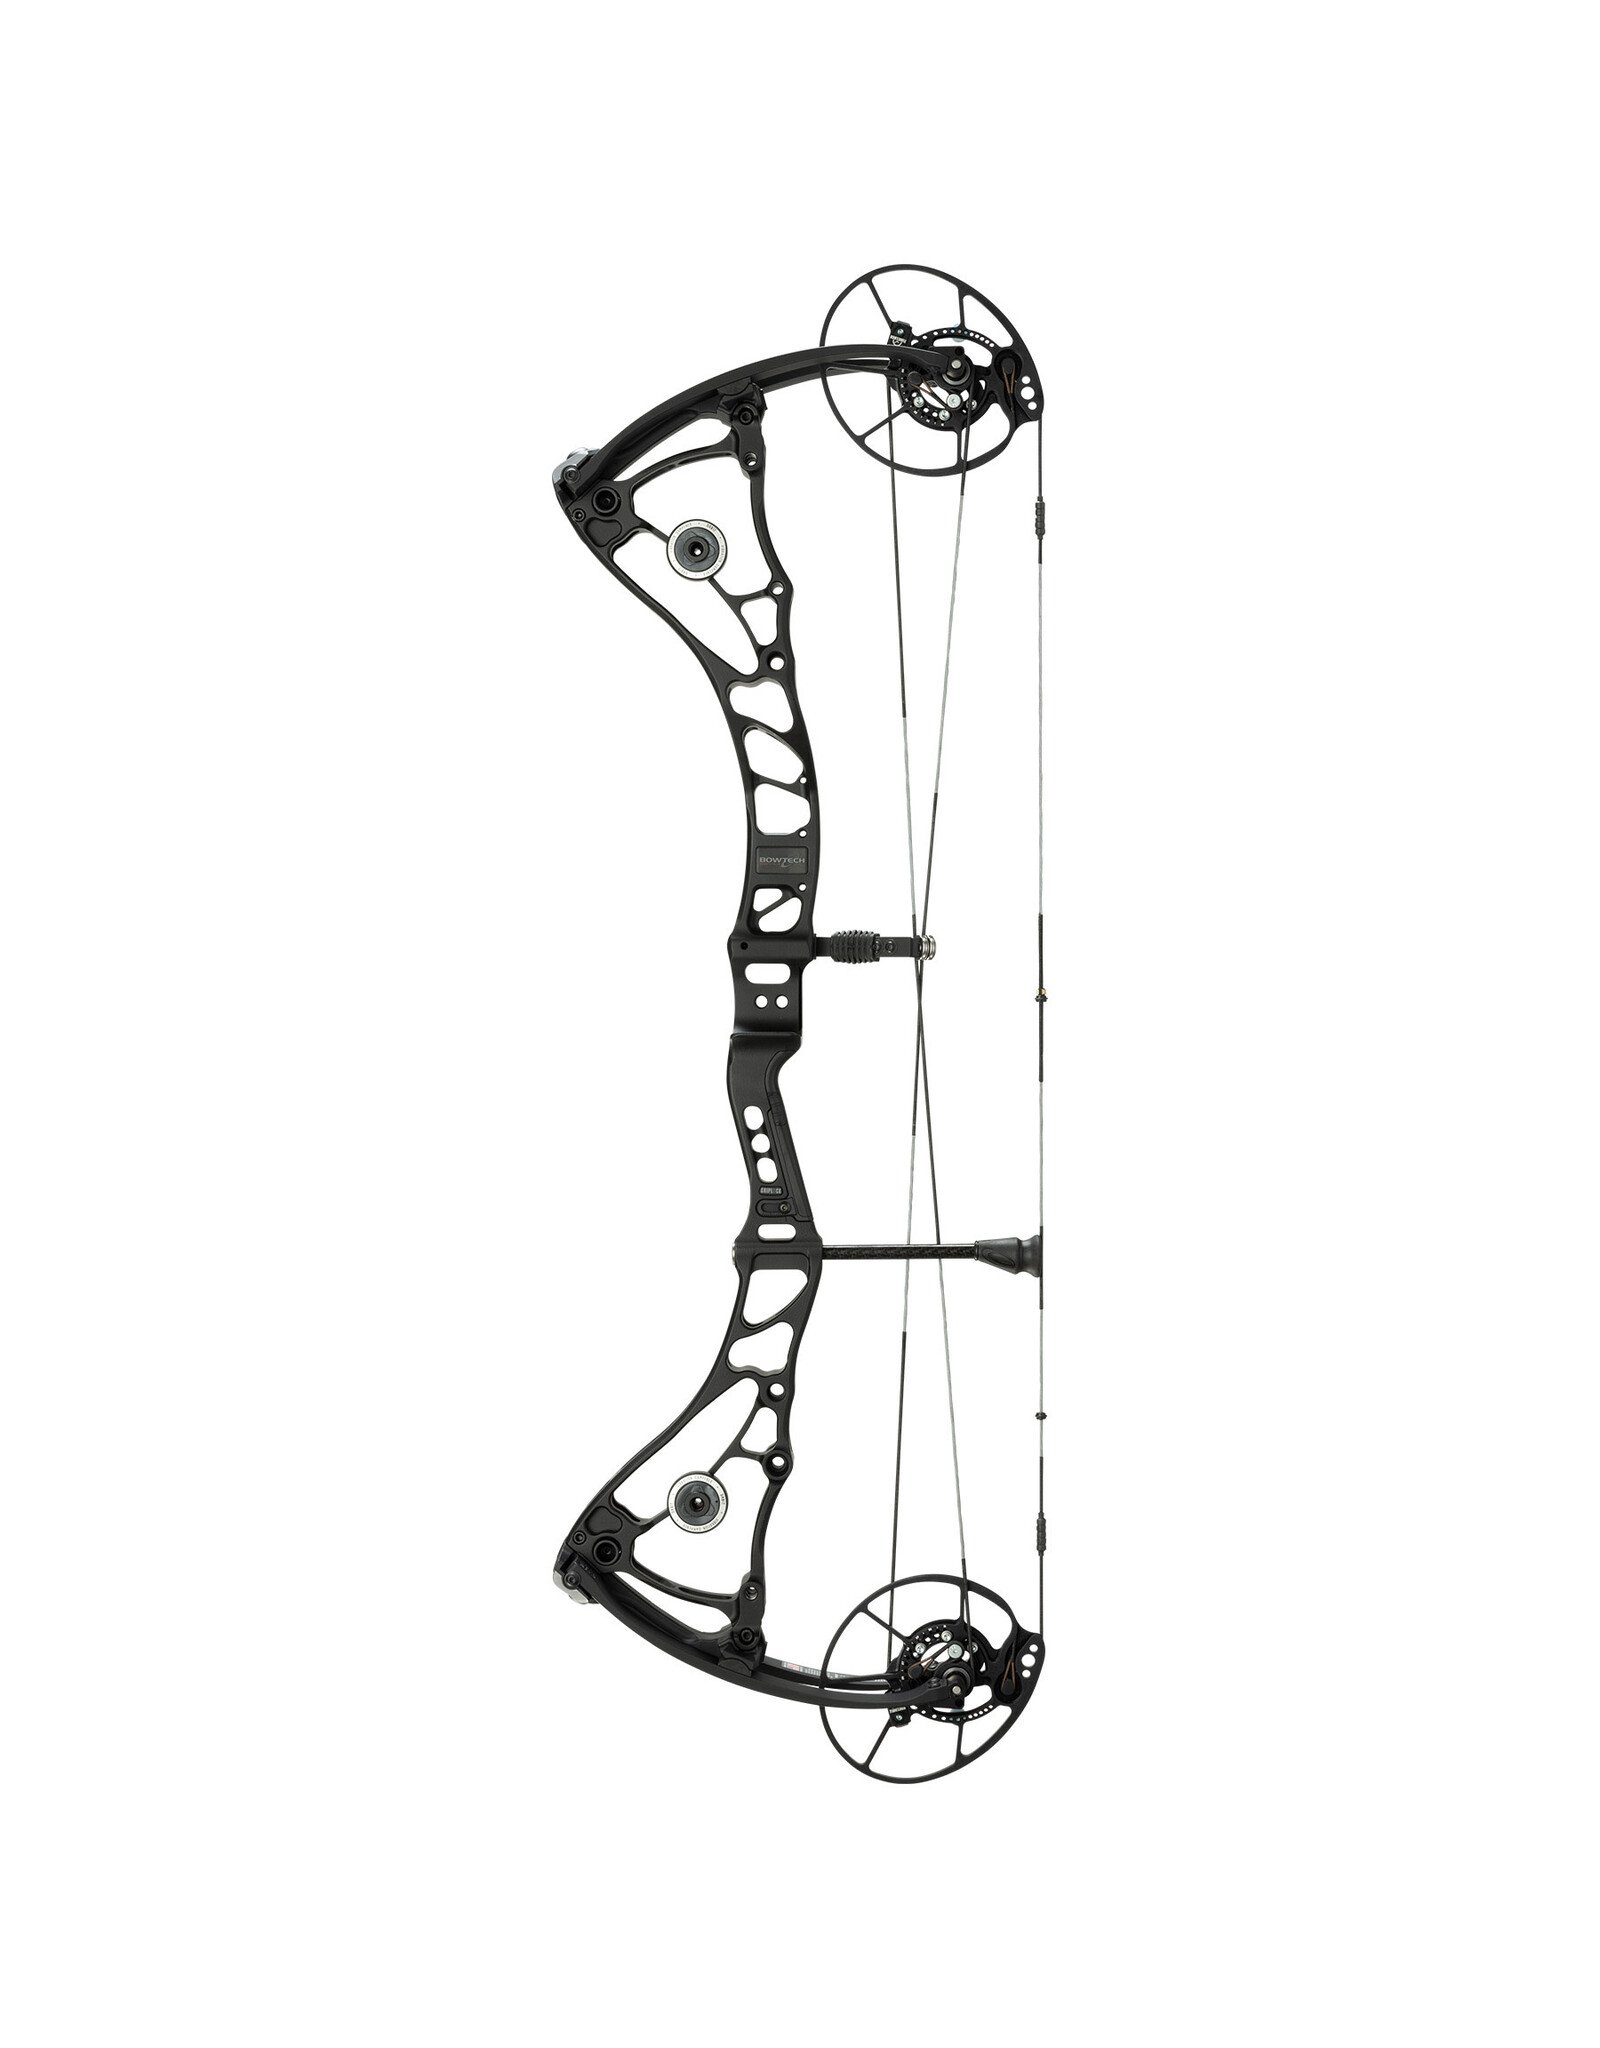 Bowtech Core SS (right) 70lbs (black) 26-31" draw / A to A 31.5" /  brace 6.25"/ 337 fps / 4.5 mass wt.